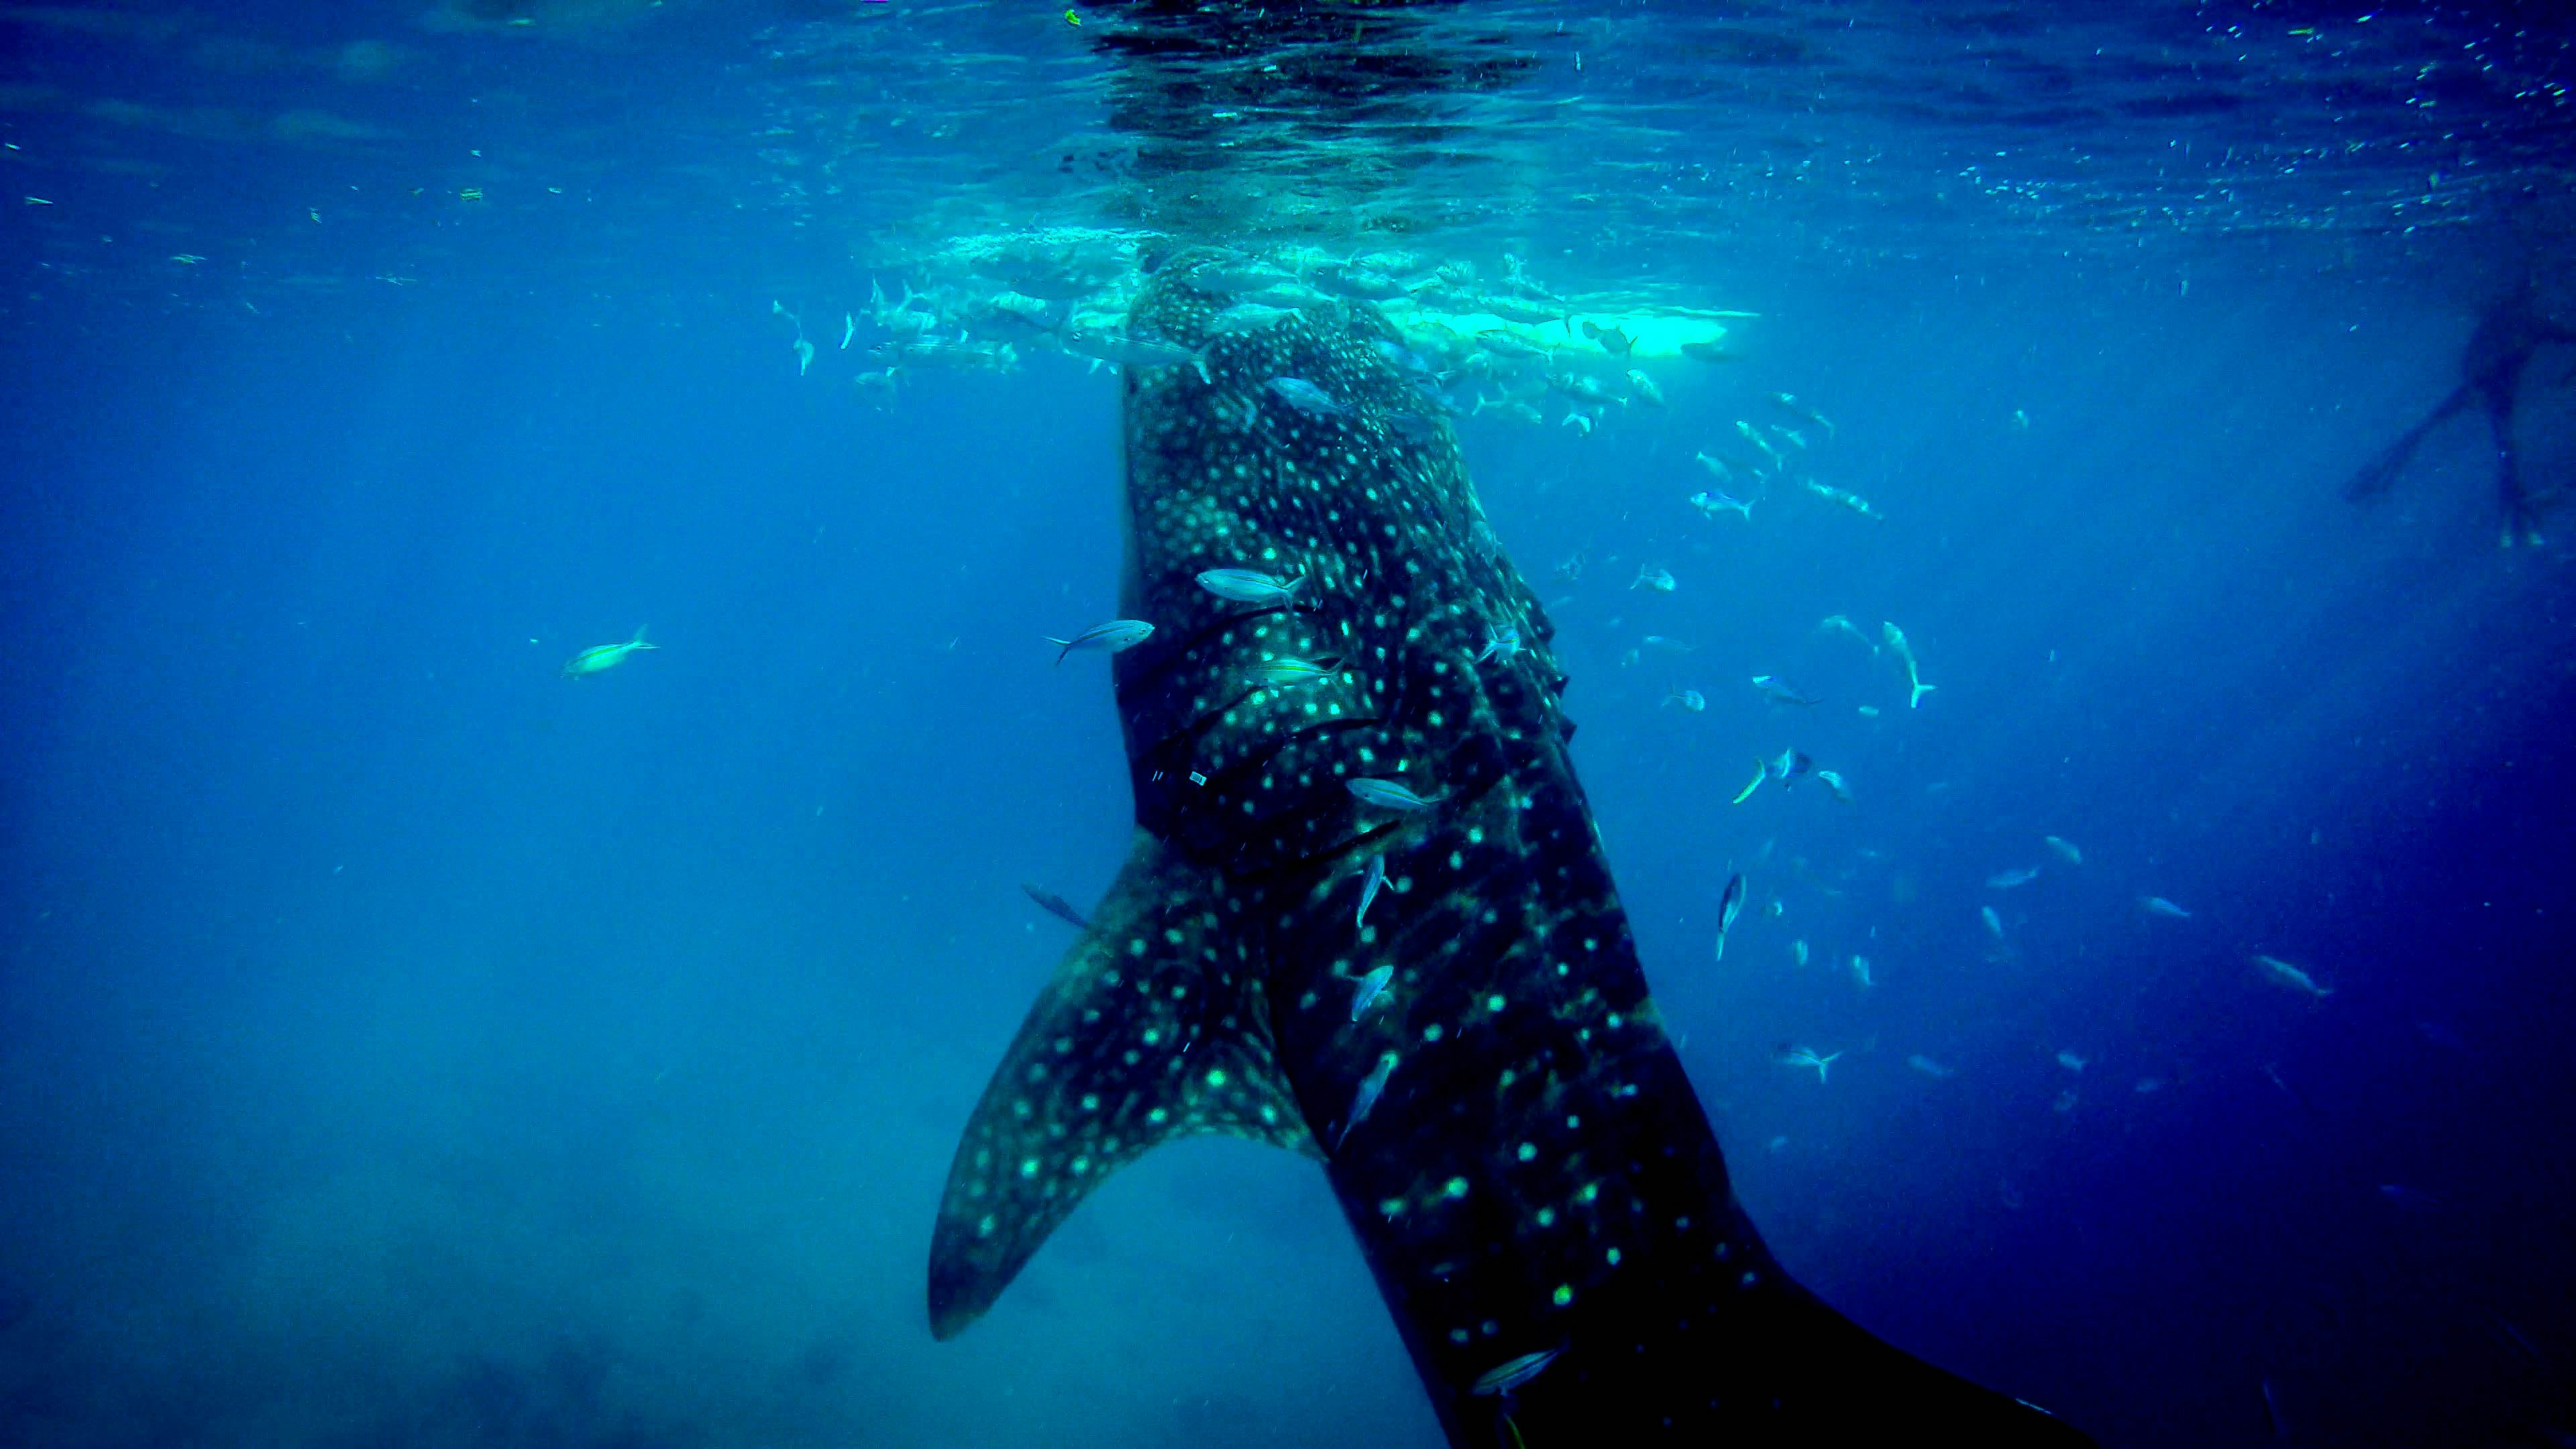 whale shark at the surface of the water with smaller fish all around